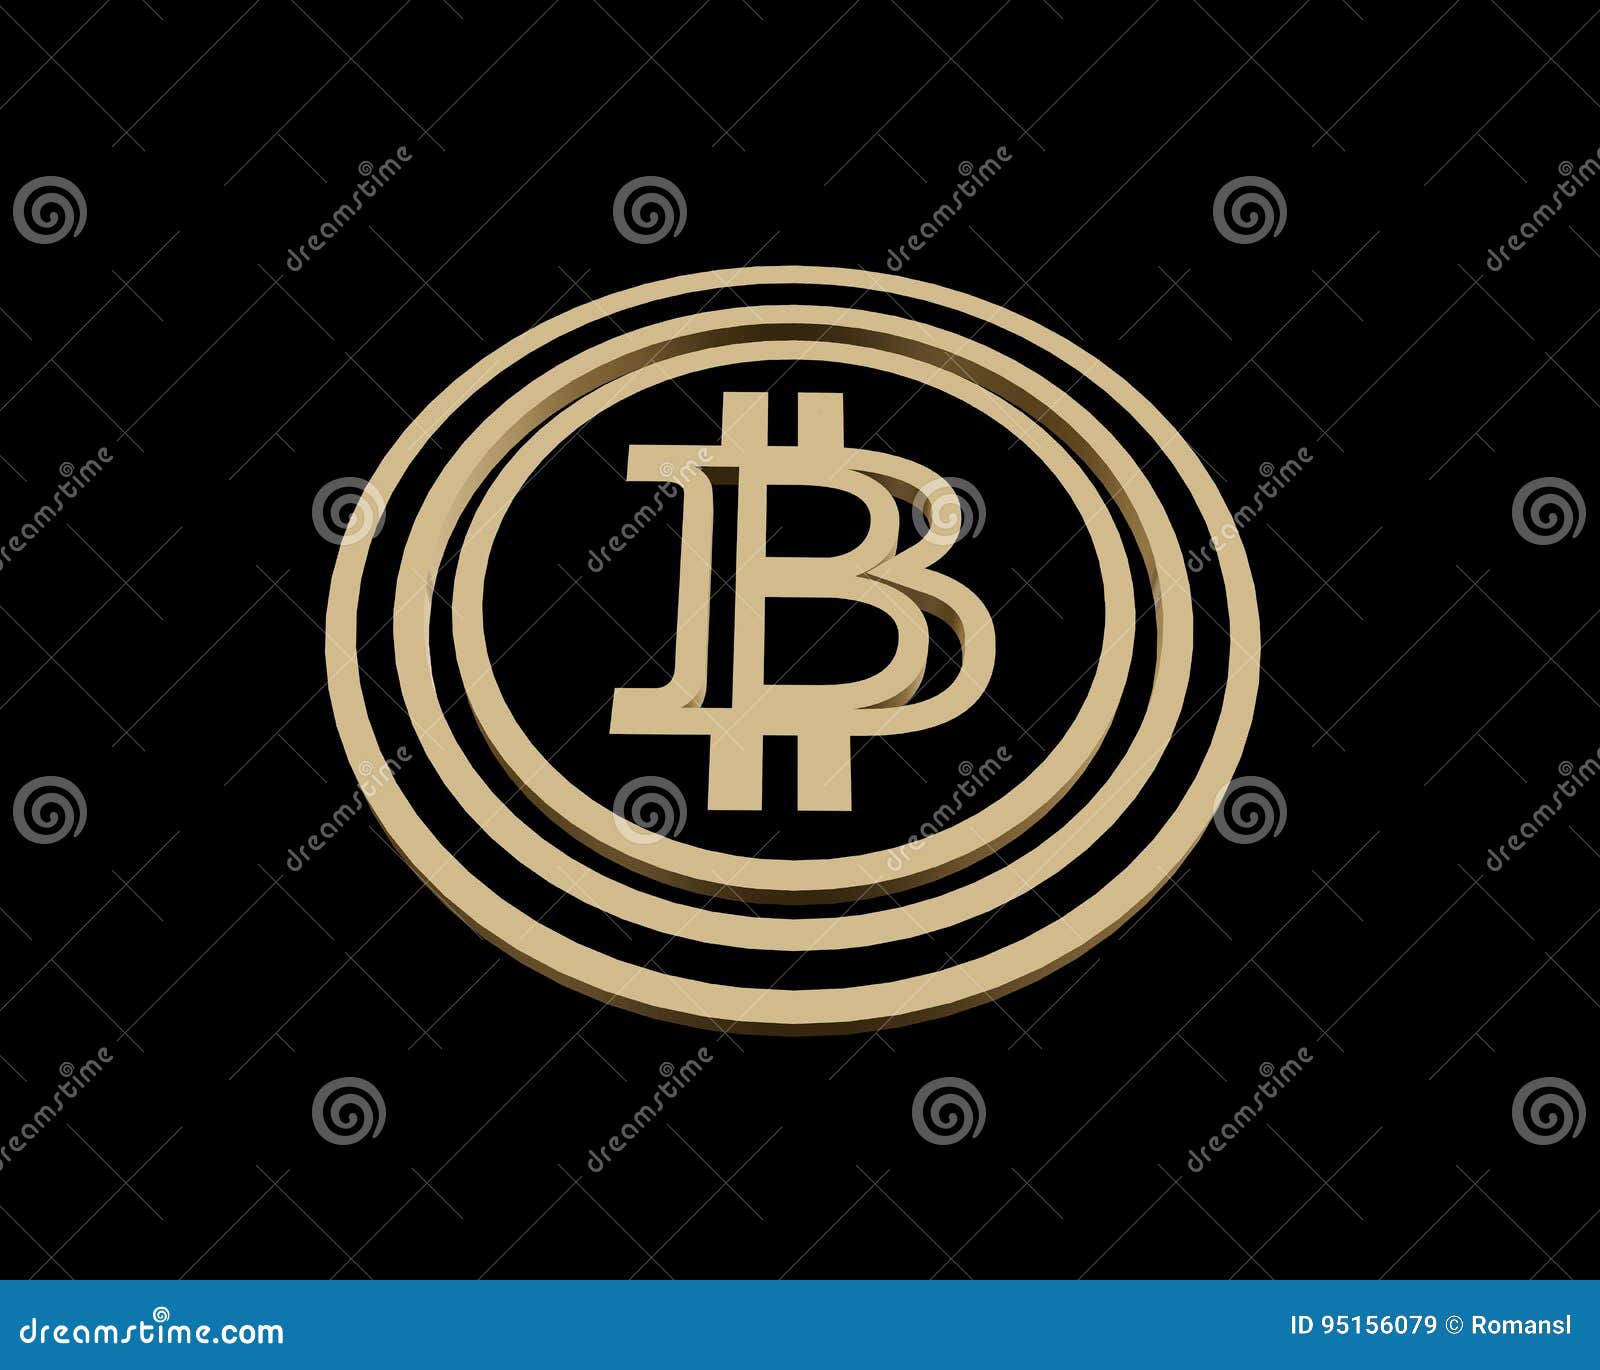 3d Rendering Golden Coin With Bitcoin Sign Stock Illustration - 